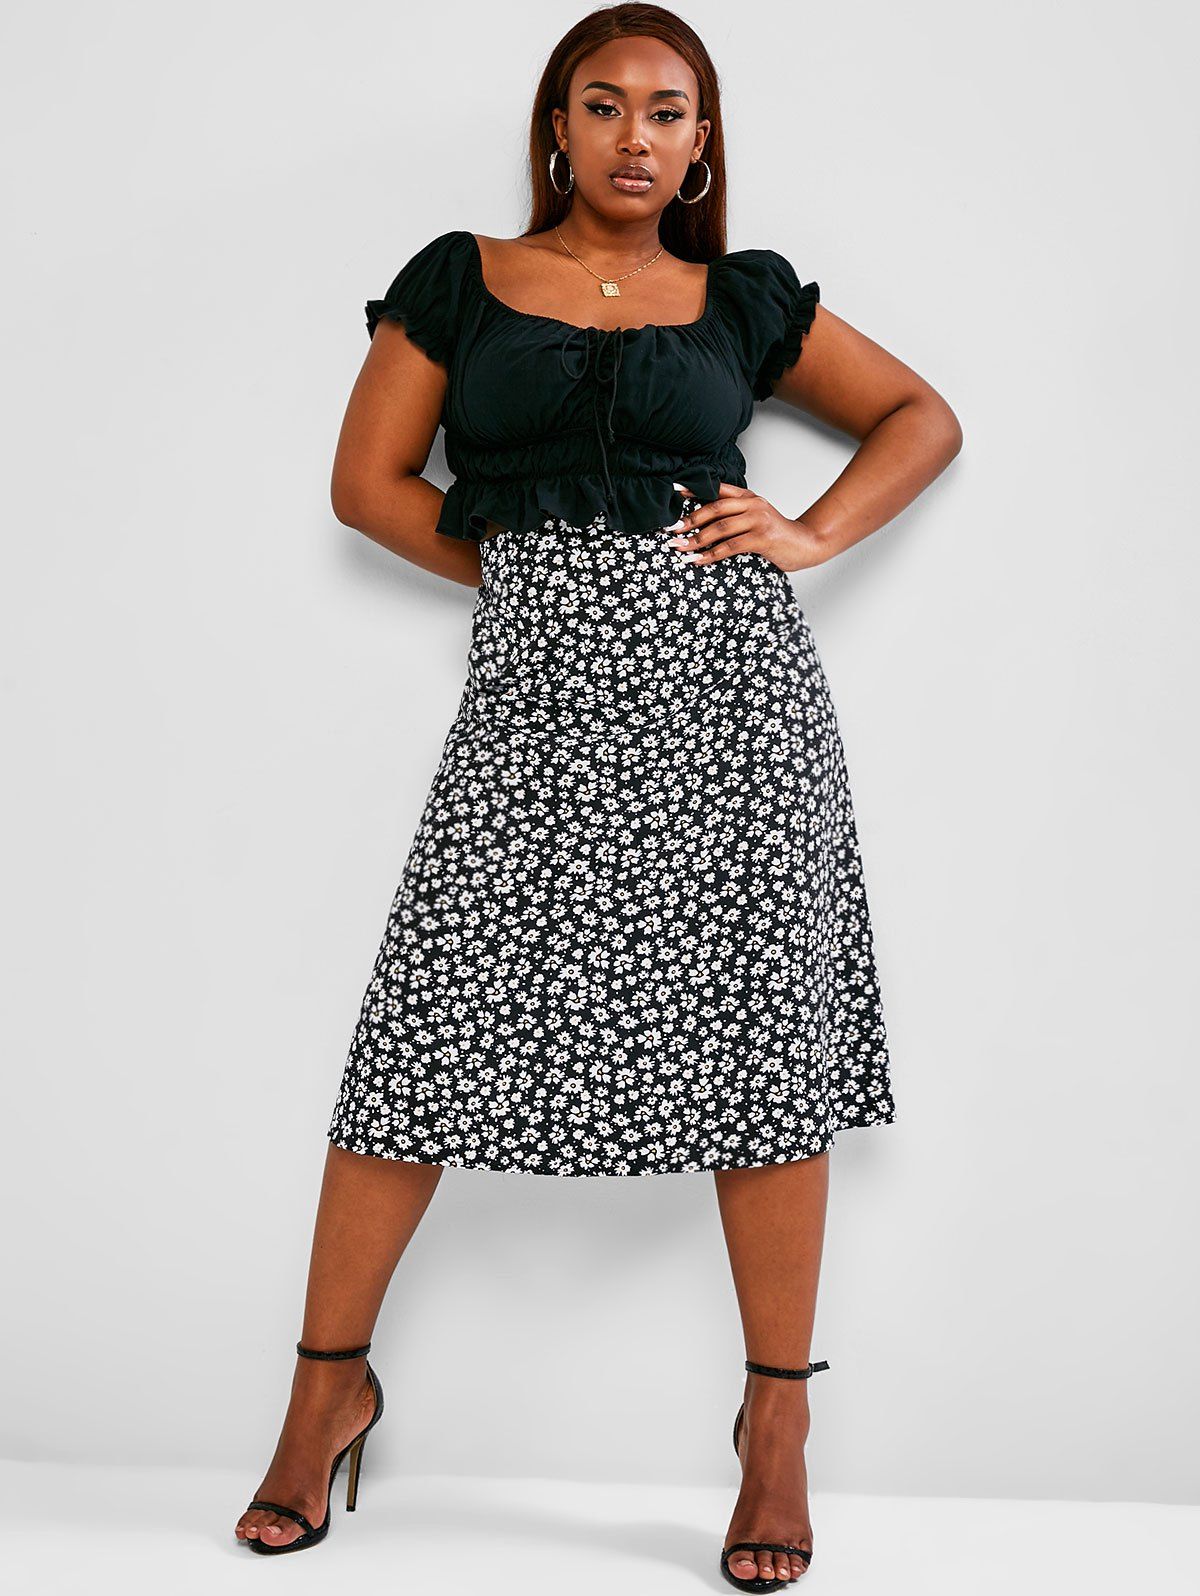 Plus Size Cinched Ruched Ditsy Print Two Piece Dress - BLACK 3XL